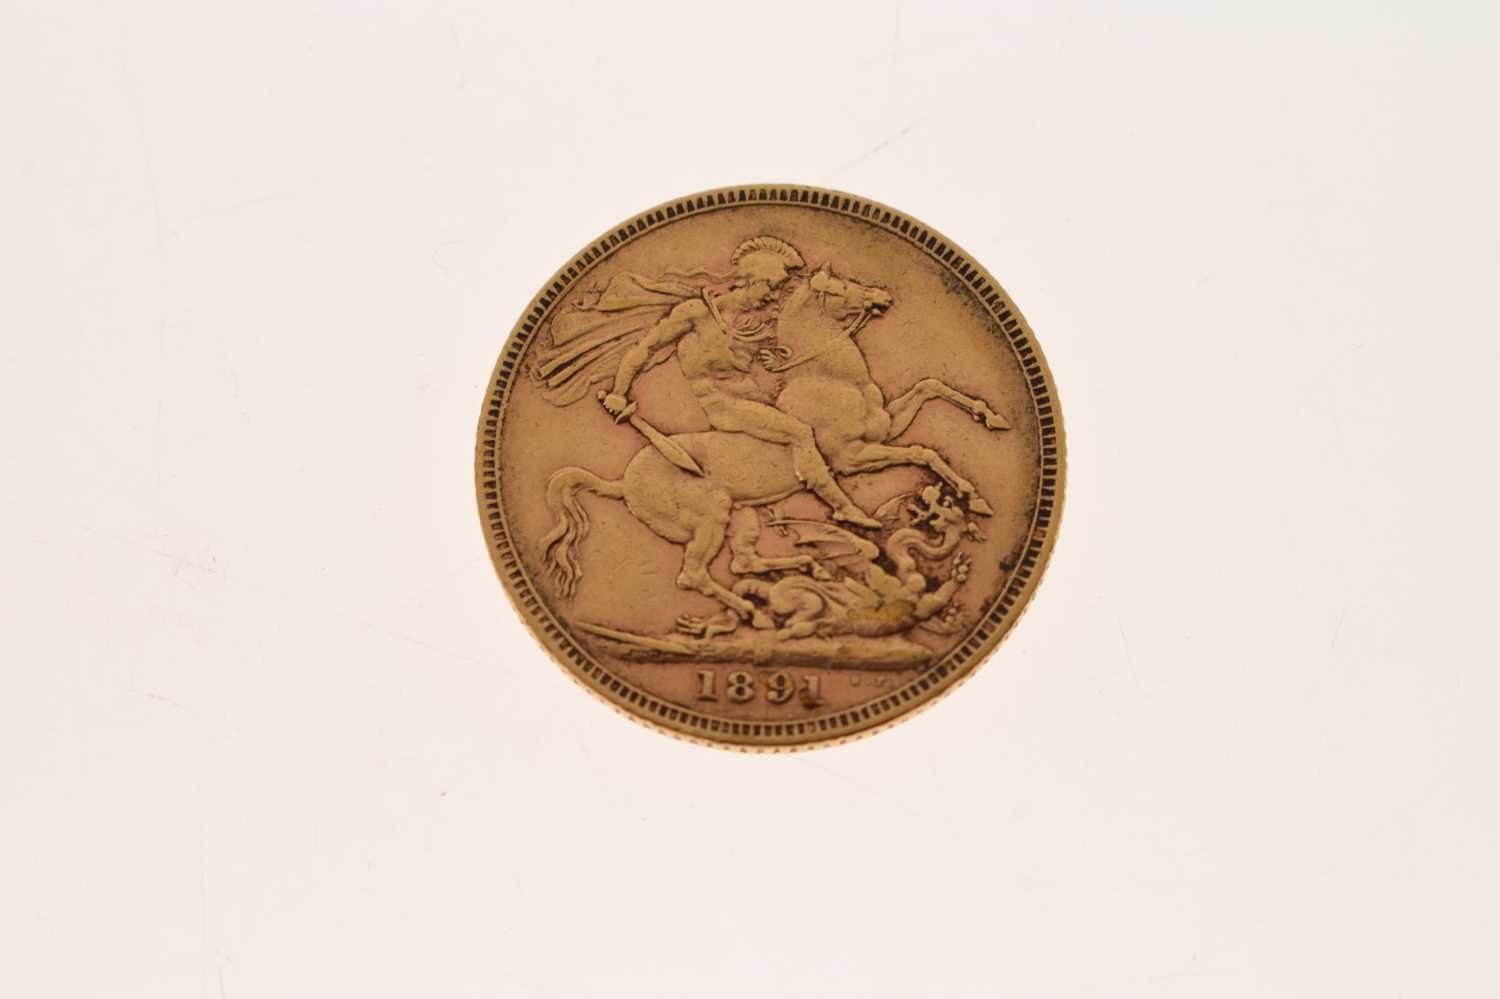 Queen Victoria gold sovereign, 1891 - Image 4 of 4